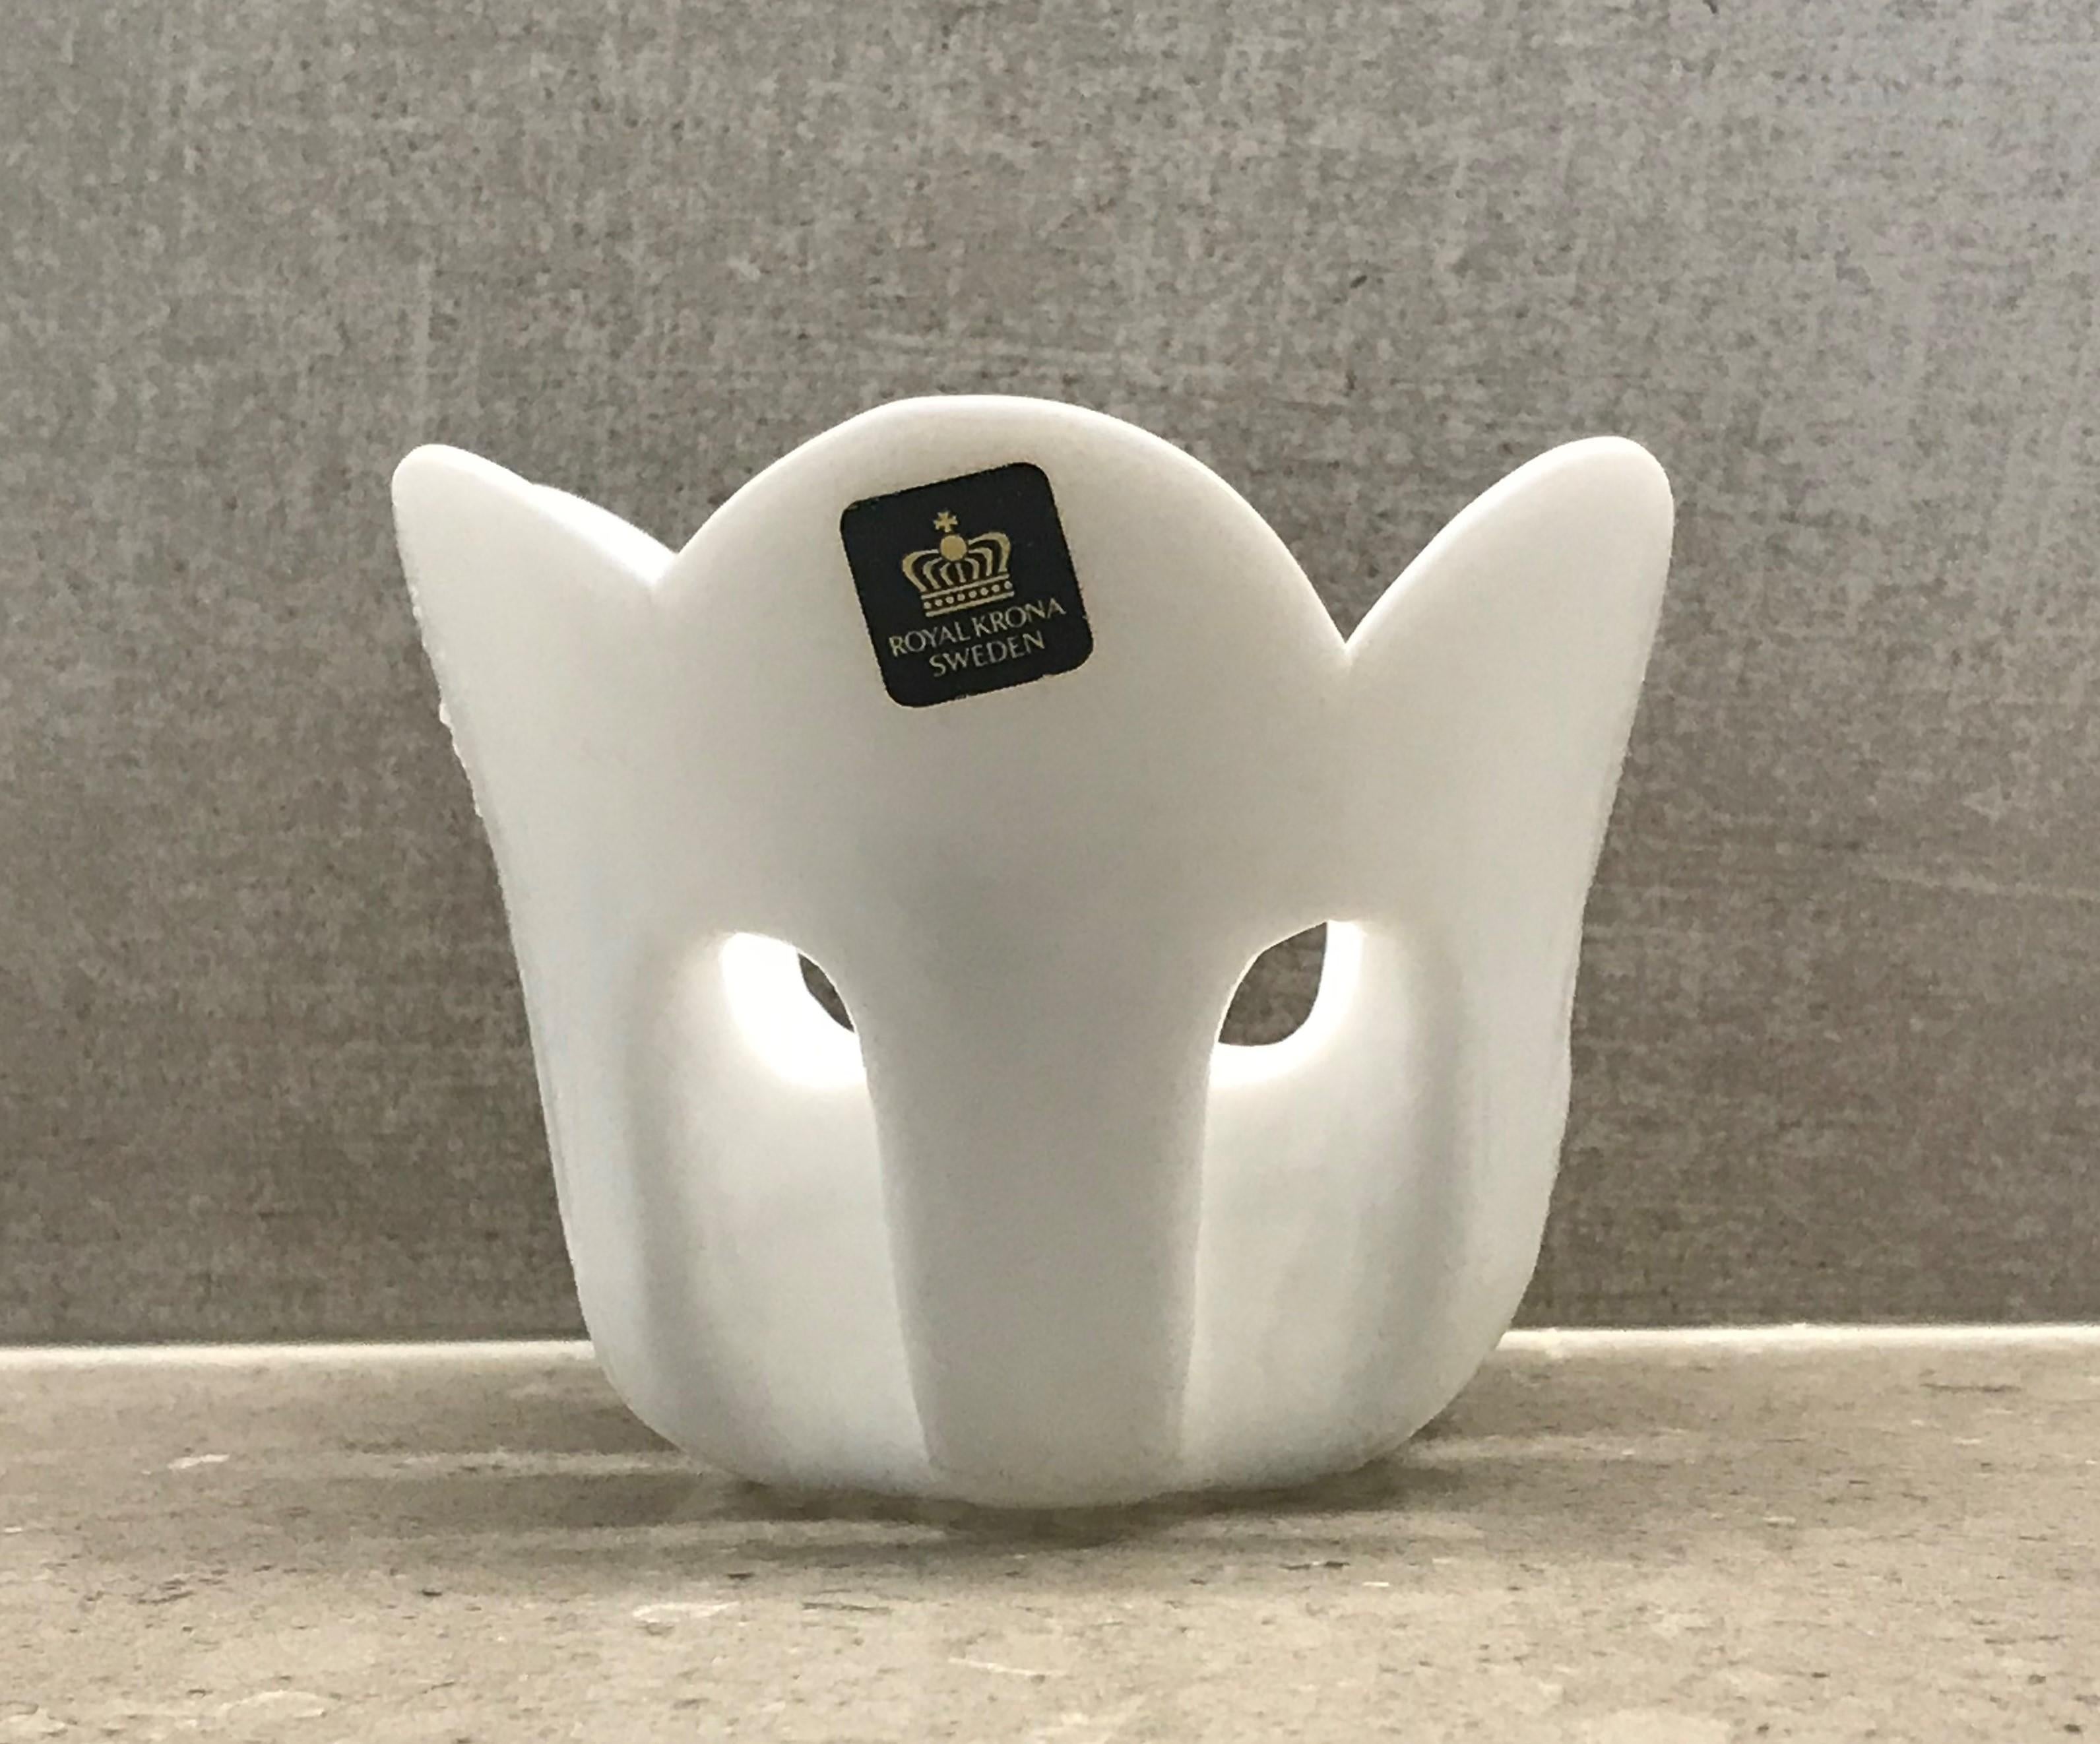 .In seldom seen shape, a set of Royal Krona Sweden tealight holders in white milk glass. Designed in the 1970s by Bengt Edenfalk. All in perfect condition one with foil label. Measures 3 3/4 inches top diameter and 3 inches high.
Please look at